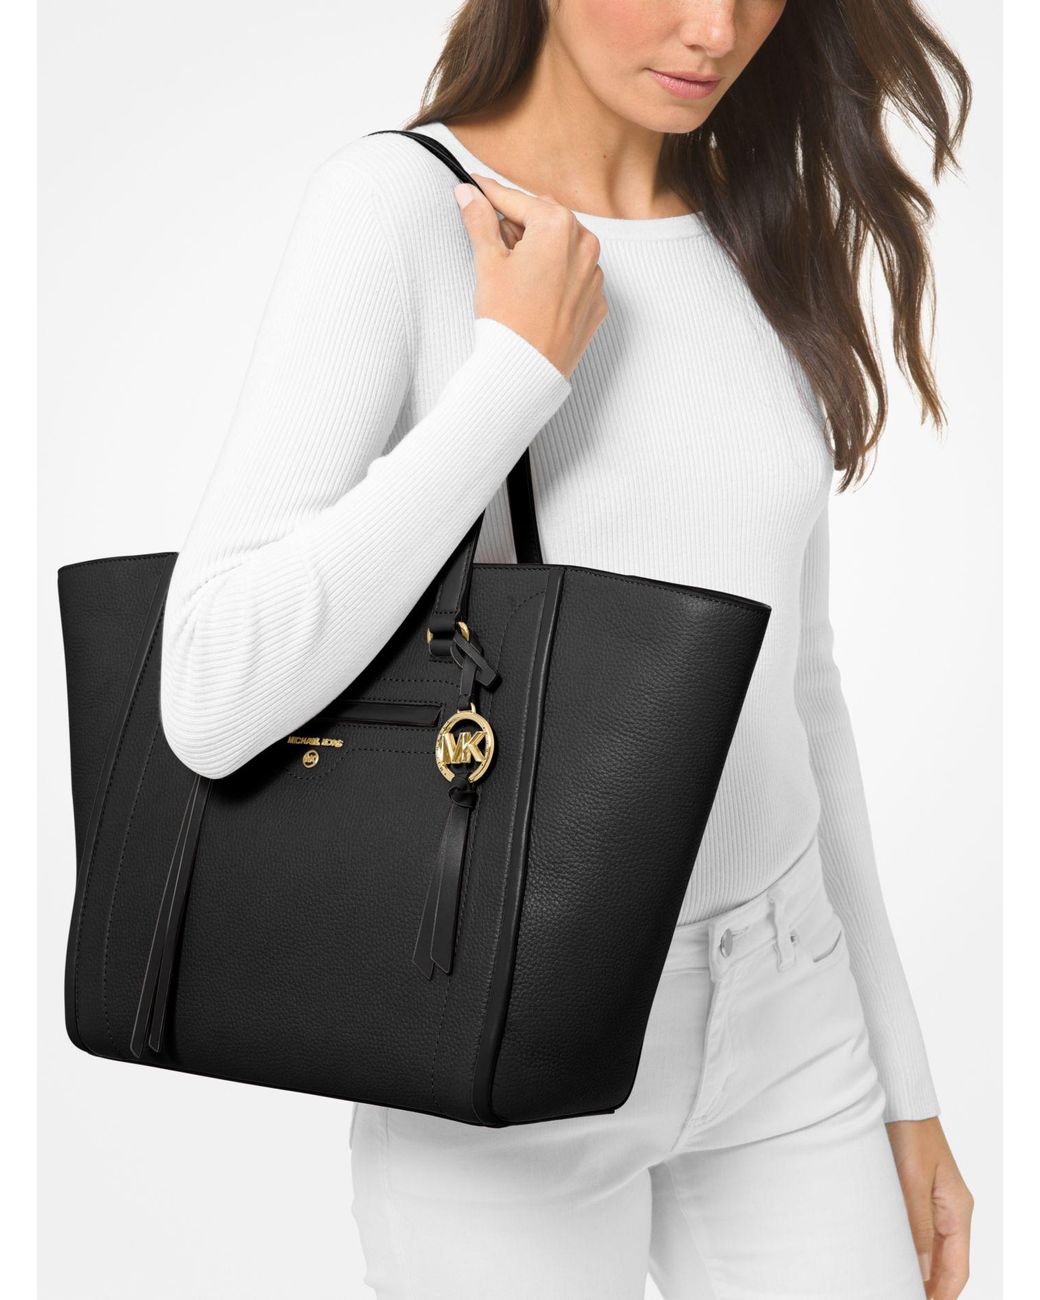 Michael Kors Carine Large Pebbled Leather Tote Bag in Black | Lyst